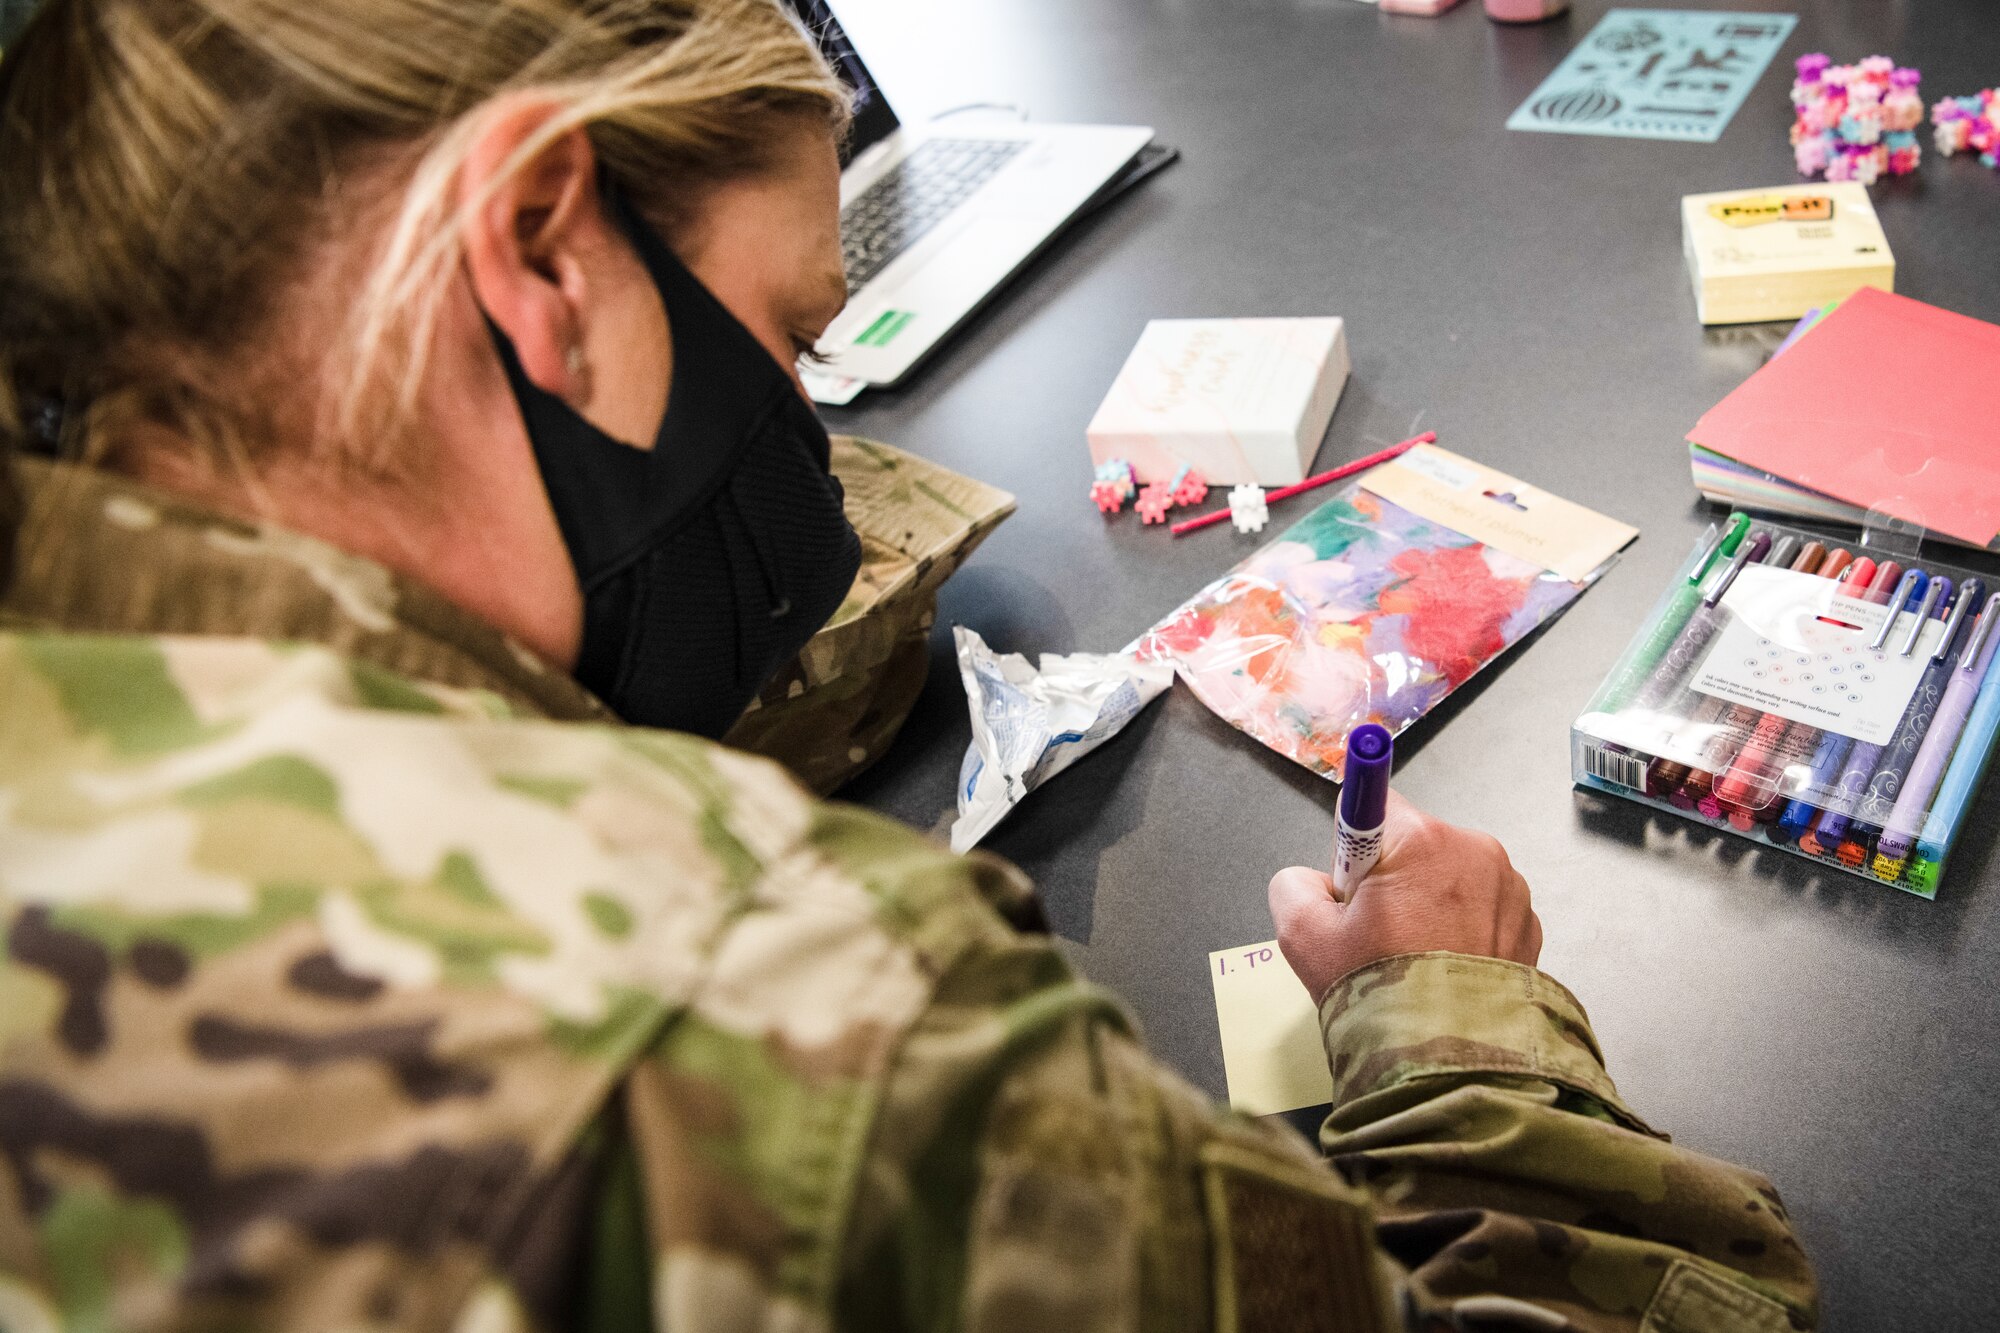 A female Airman writes on a sticky note with a purple marker.